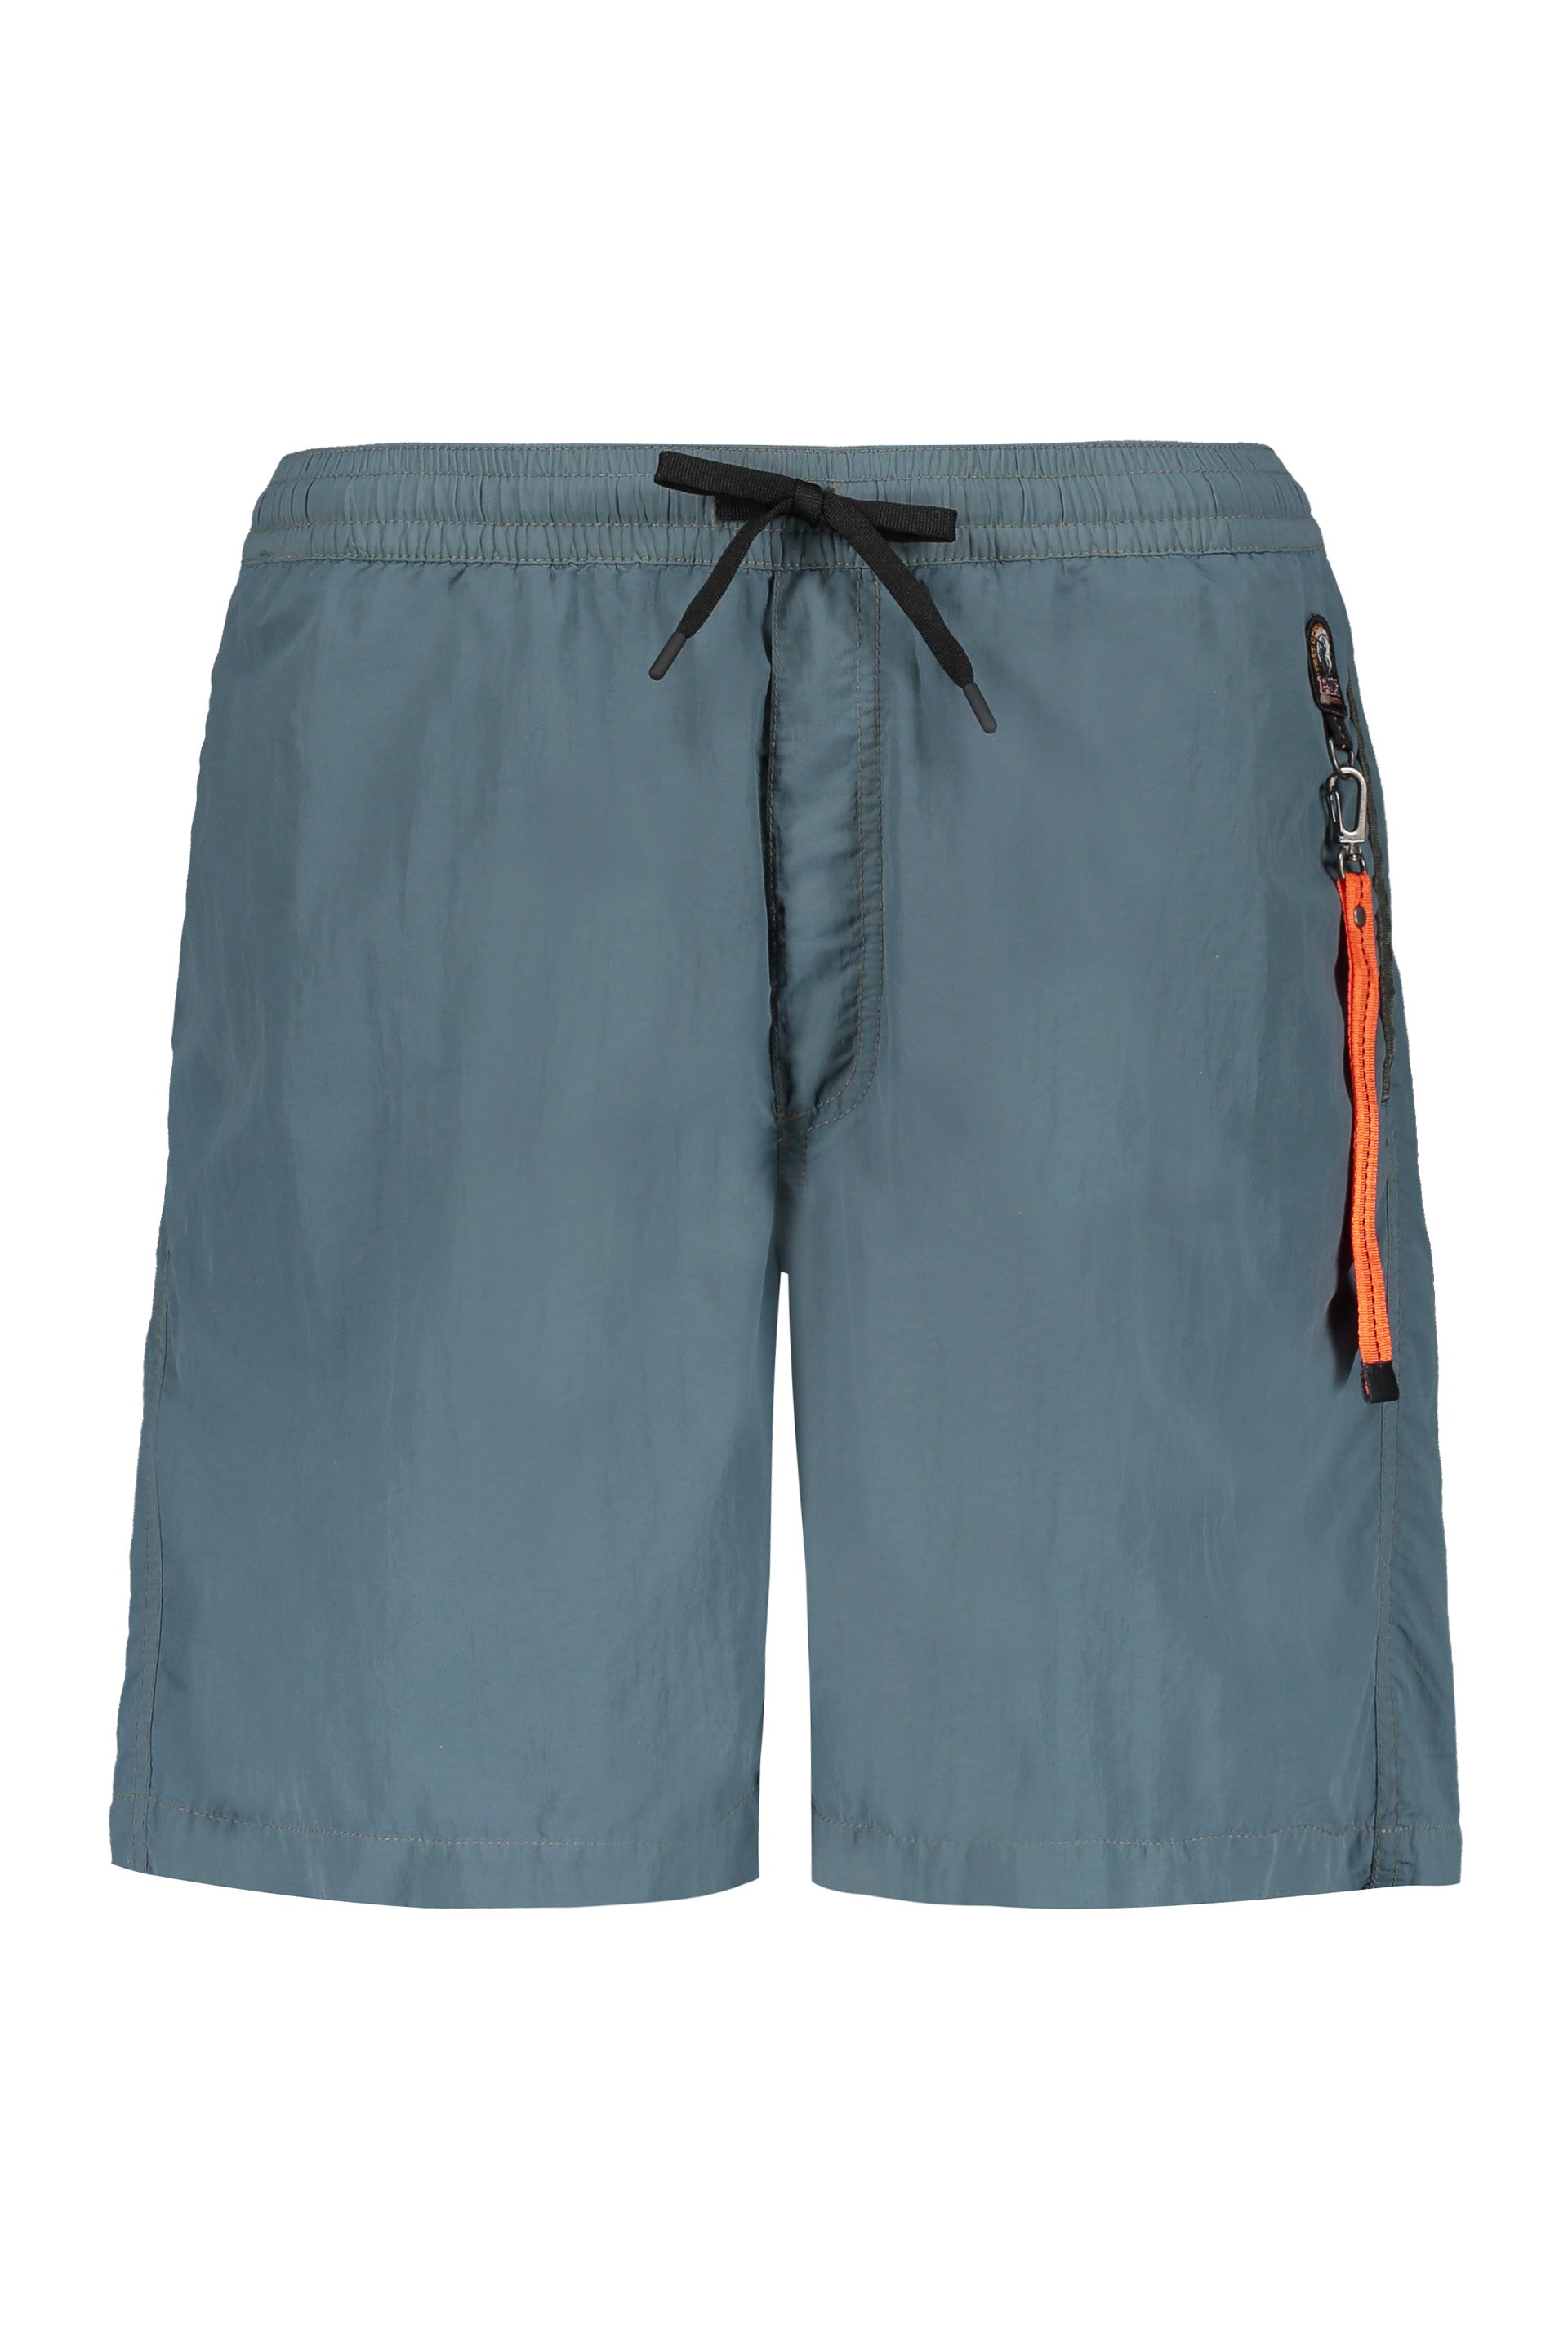 Parajumpers-OUTLET-SALE-Logo-print-swim-shorts-Badebekleidung-L-ARCHIVE-COLLECTION.jpg